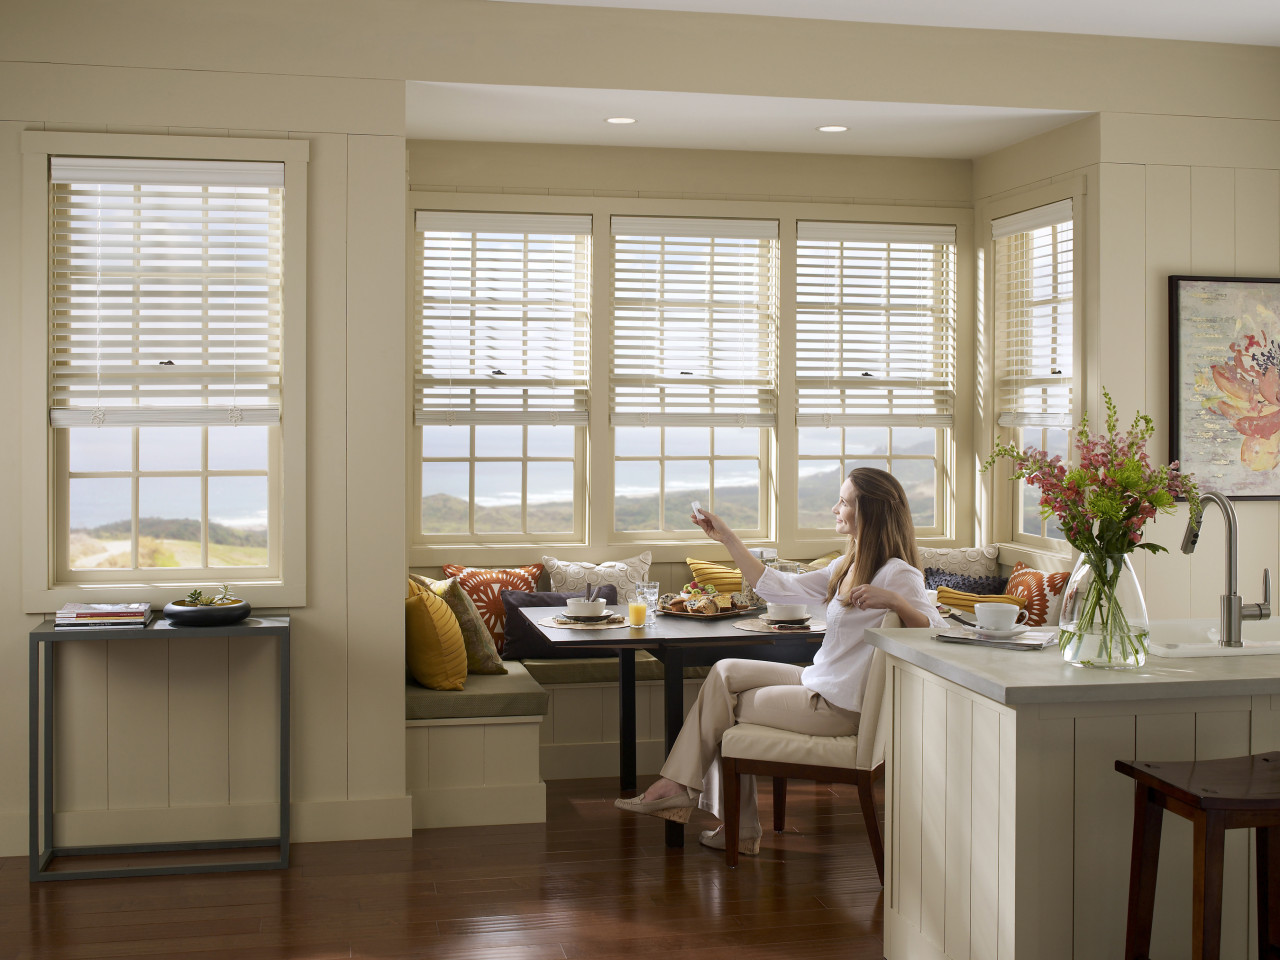 How To Fix Automatic Blinds